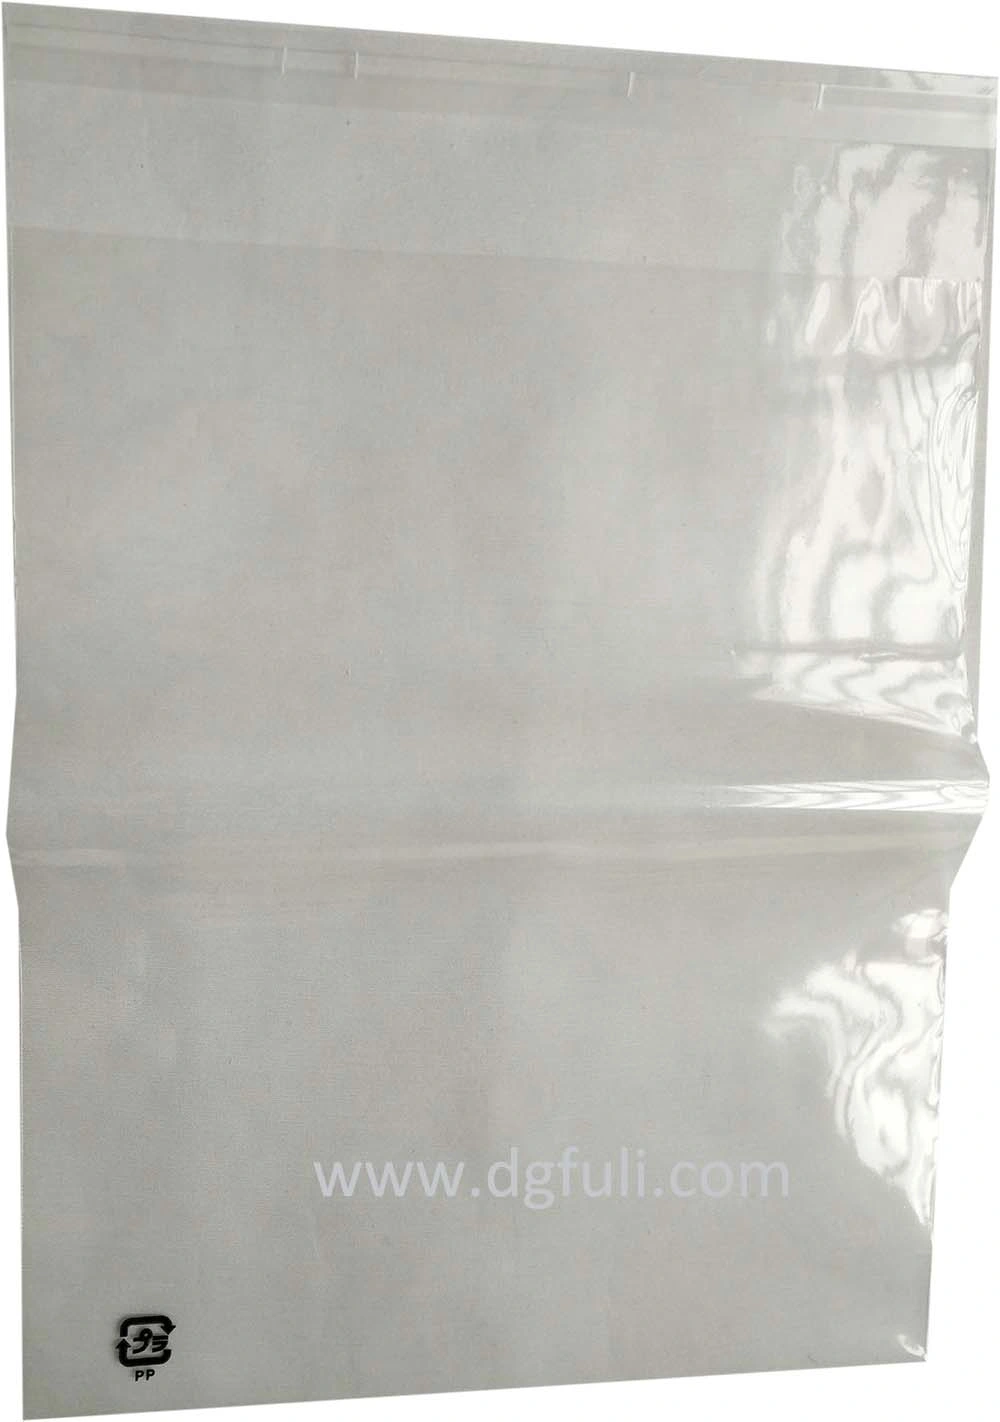 Customized Offset Printed High-Quality Laminated Transprant Packaging Bag with Self Adhesive Tape